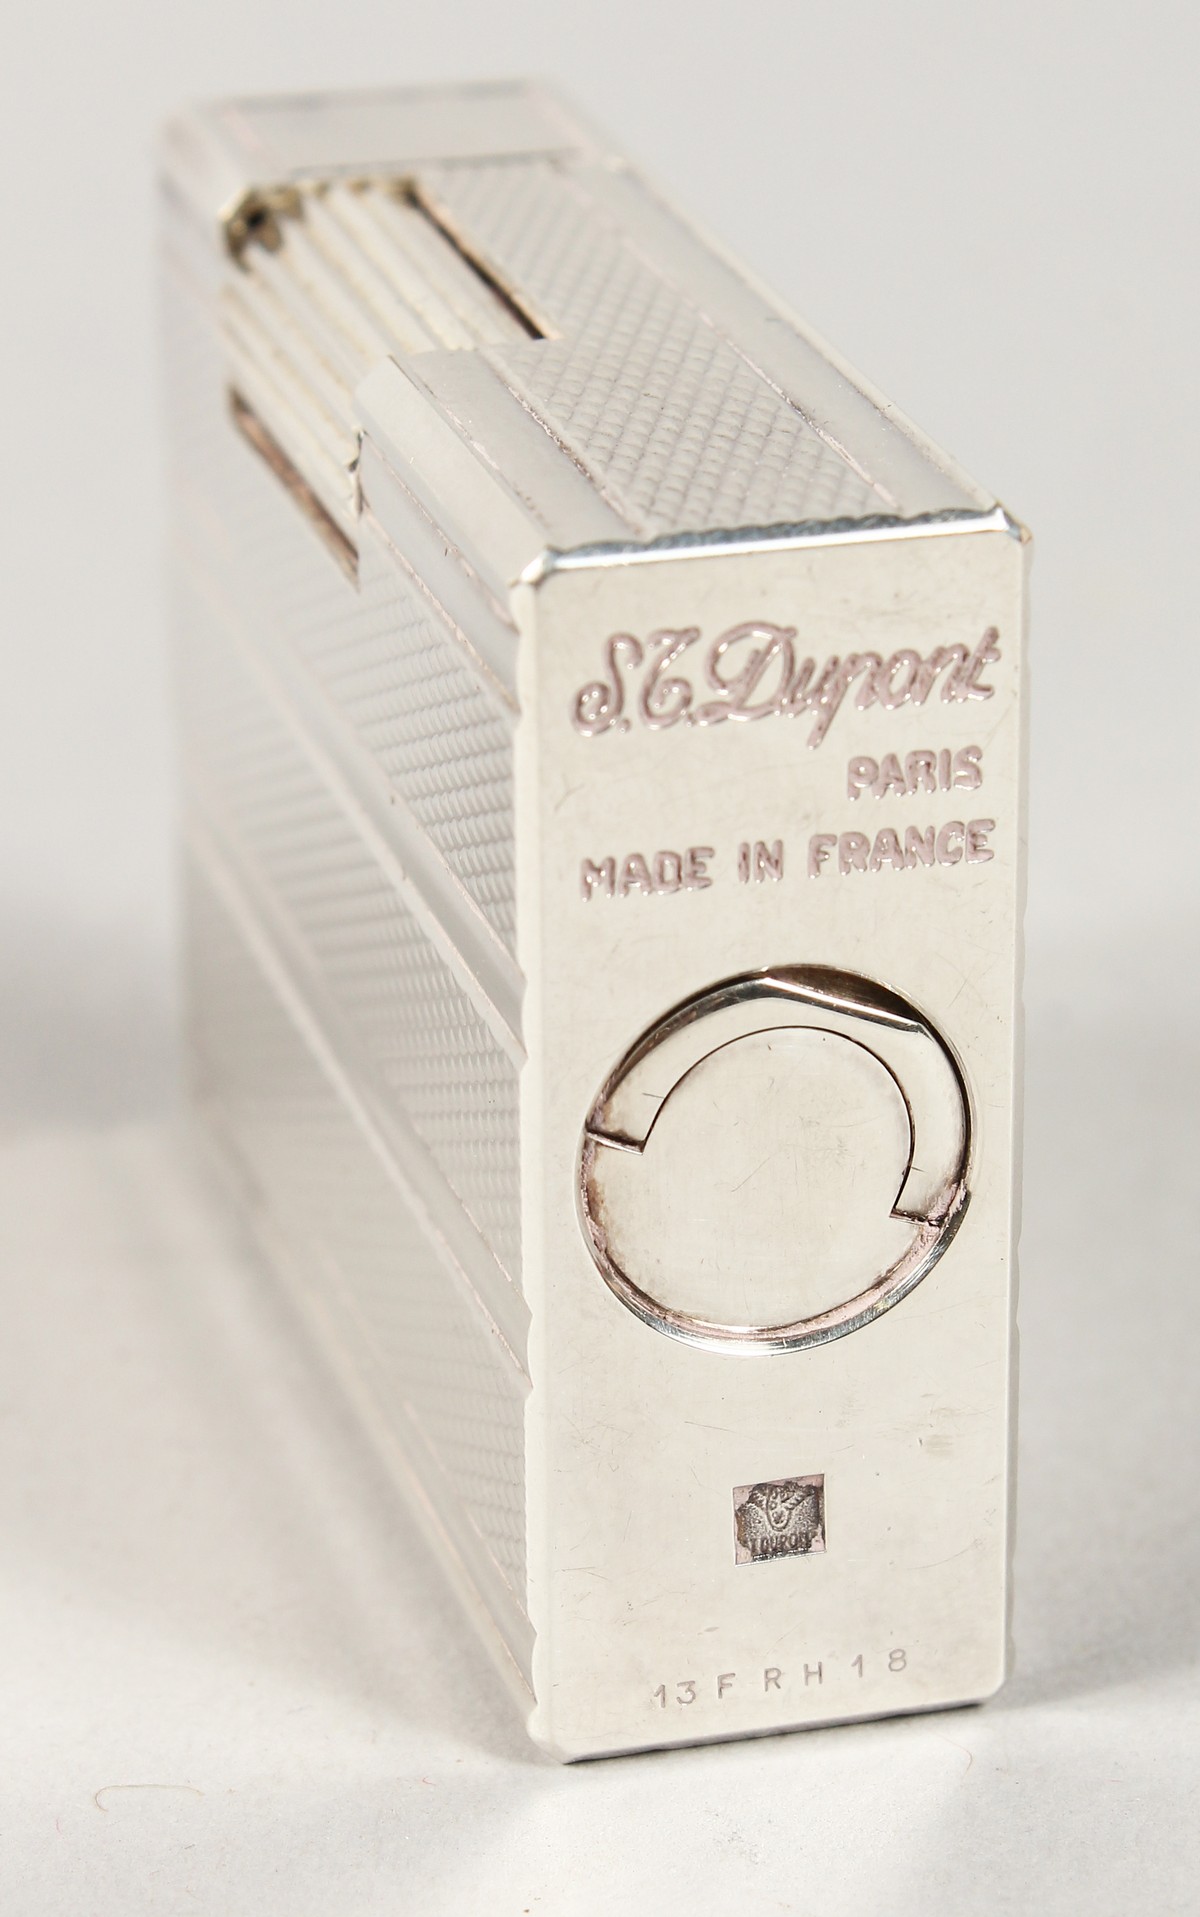 S. T. DUPONT Ligne pocket lighter, in original box with papers. - Image 2 of 8